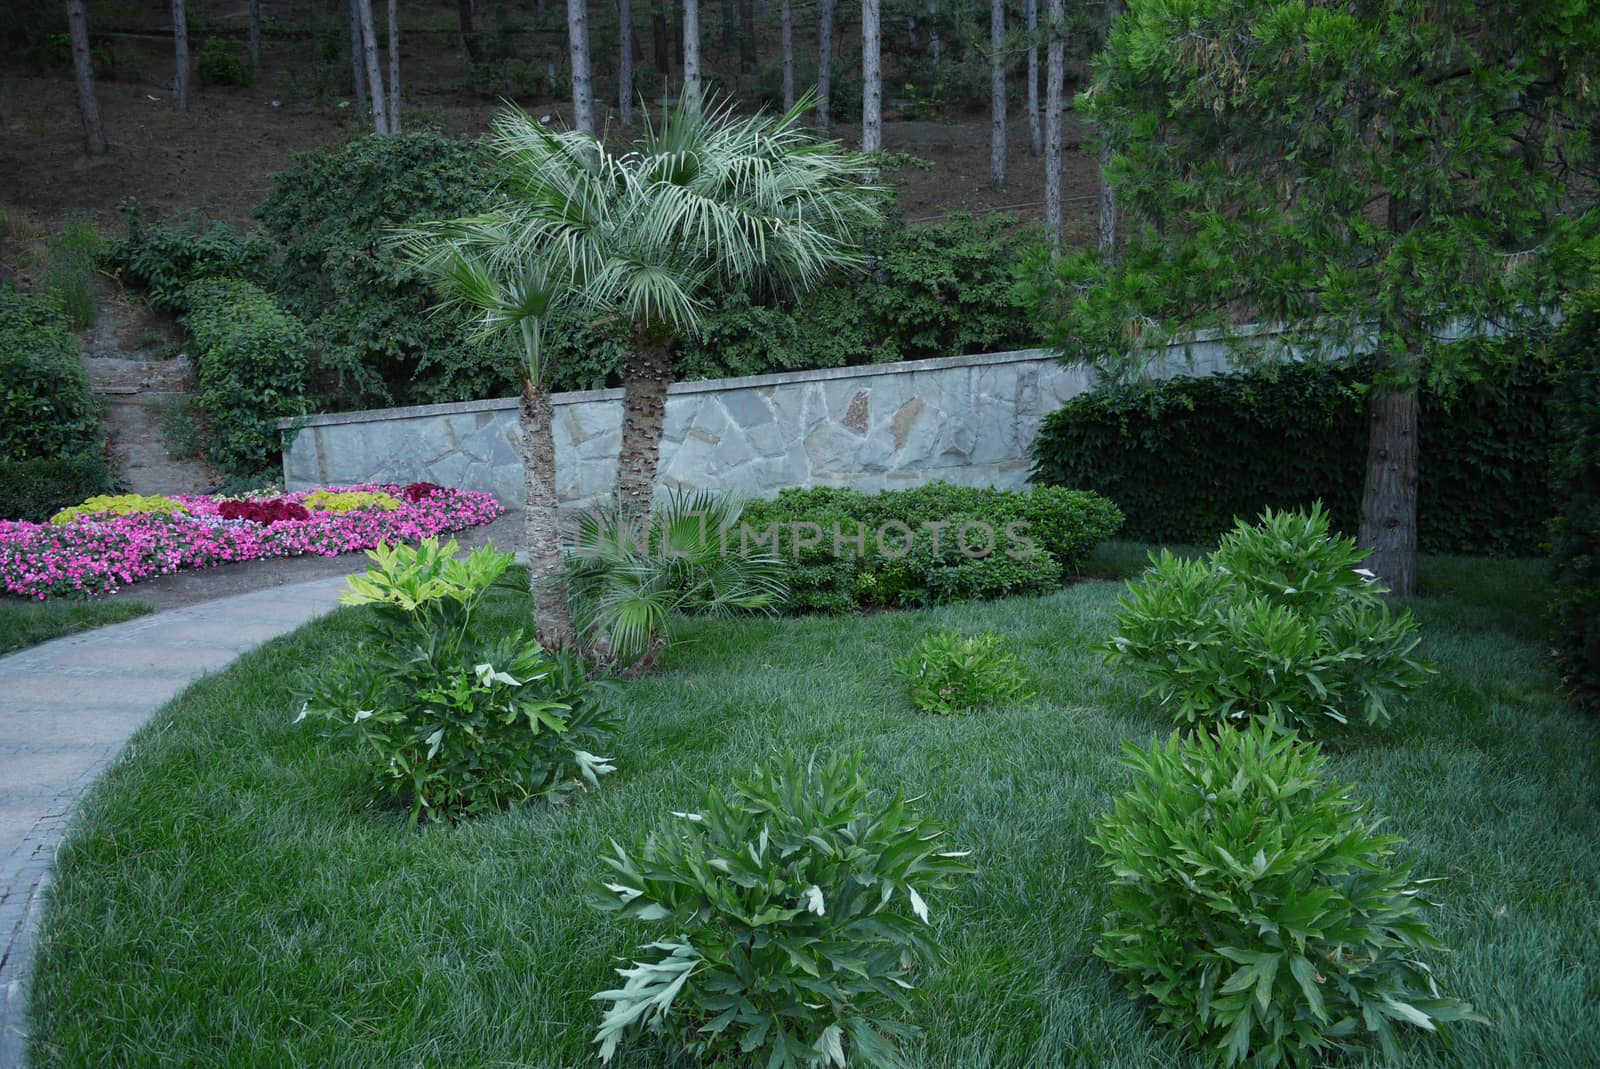 All possible plants on one photo. Palms and bushes in the foreground, trees in the back and different flowers around